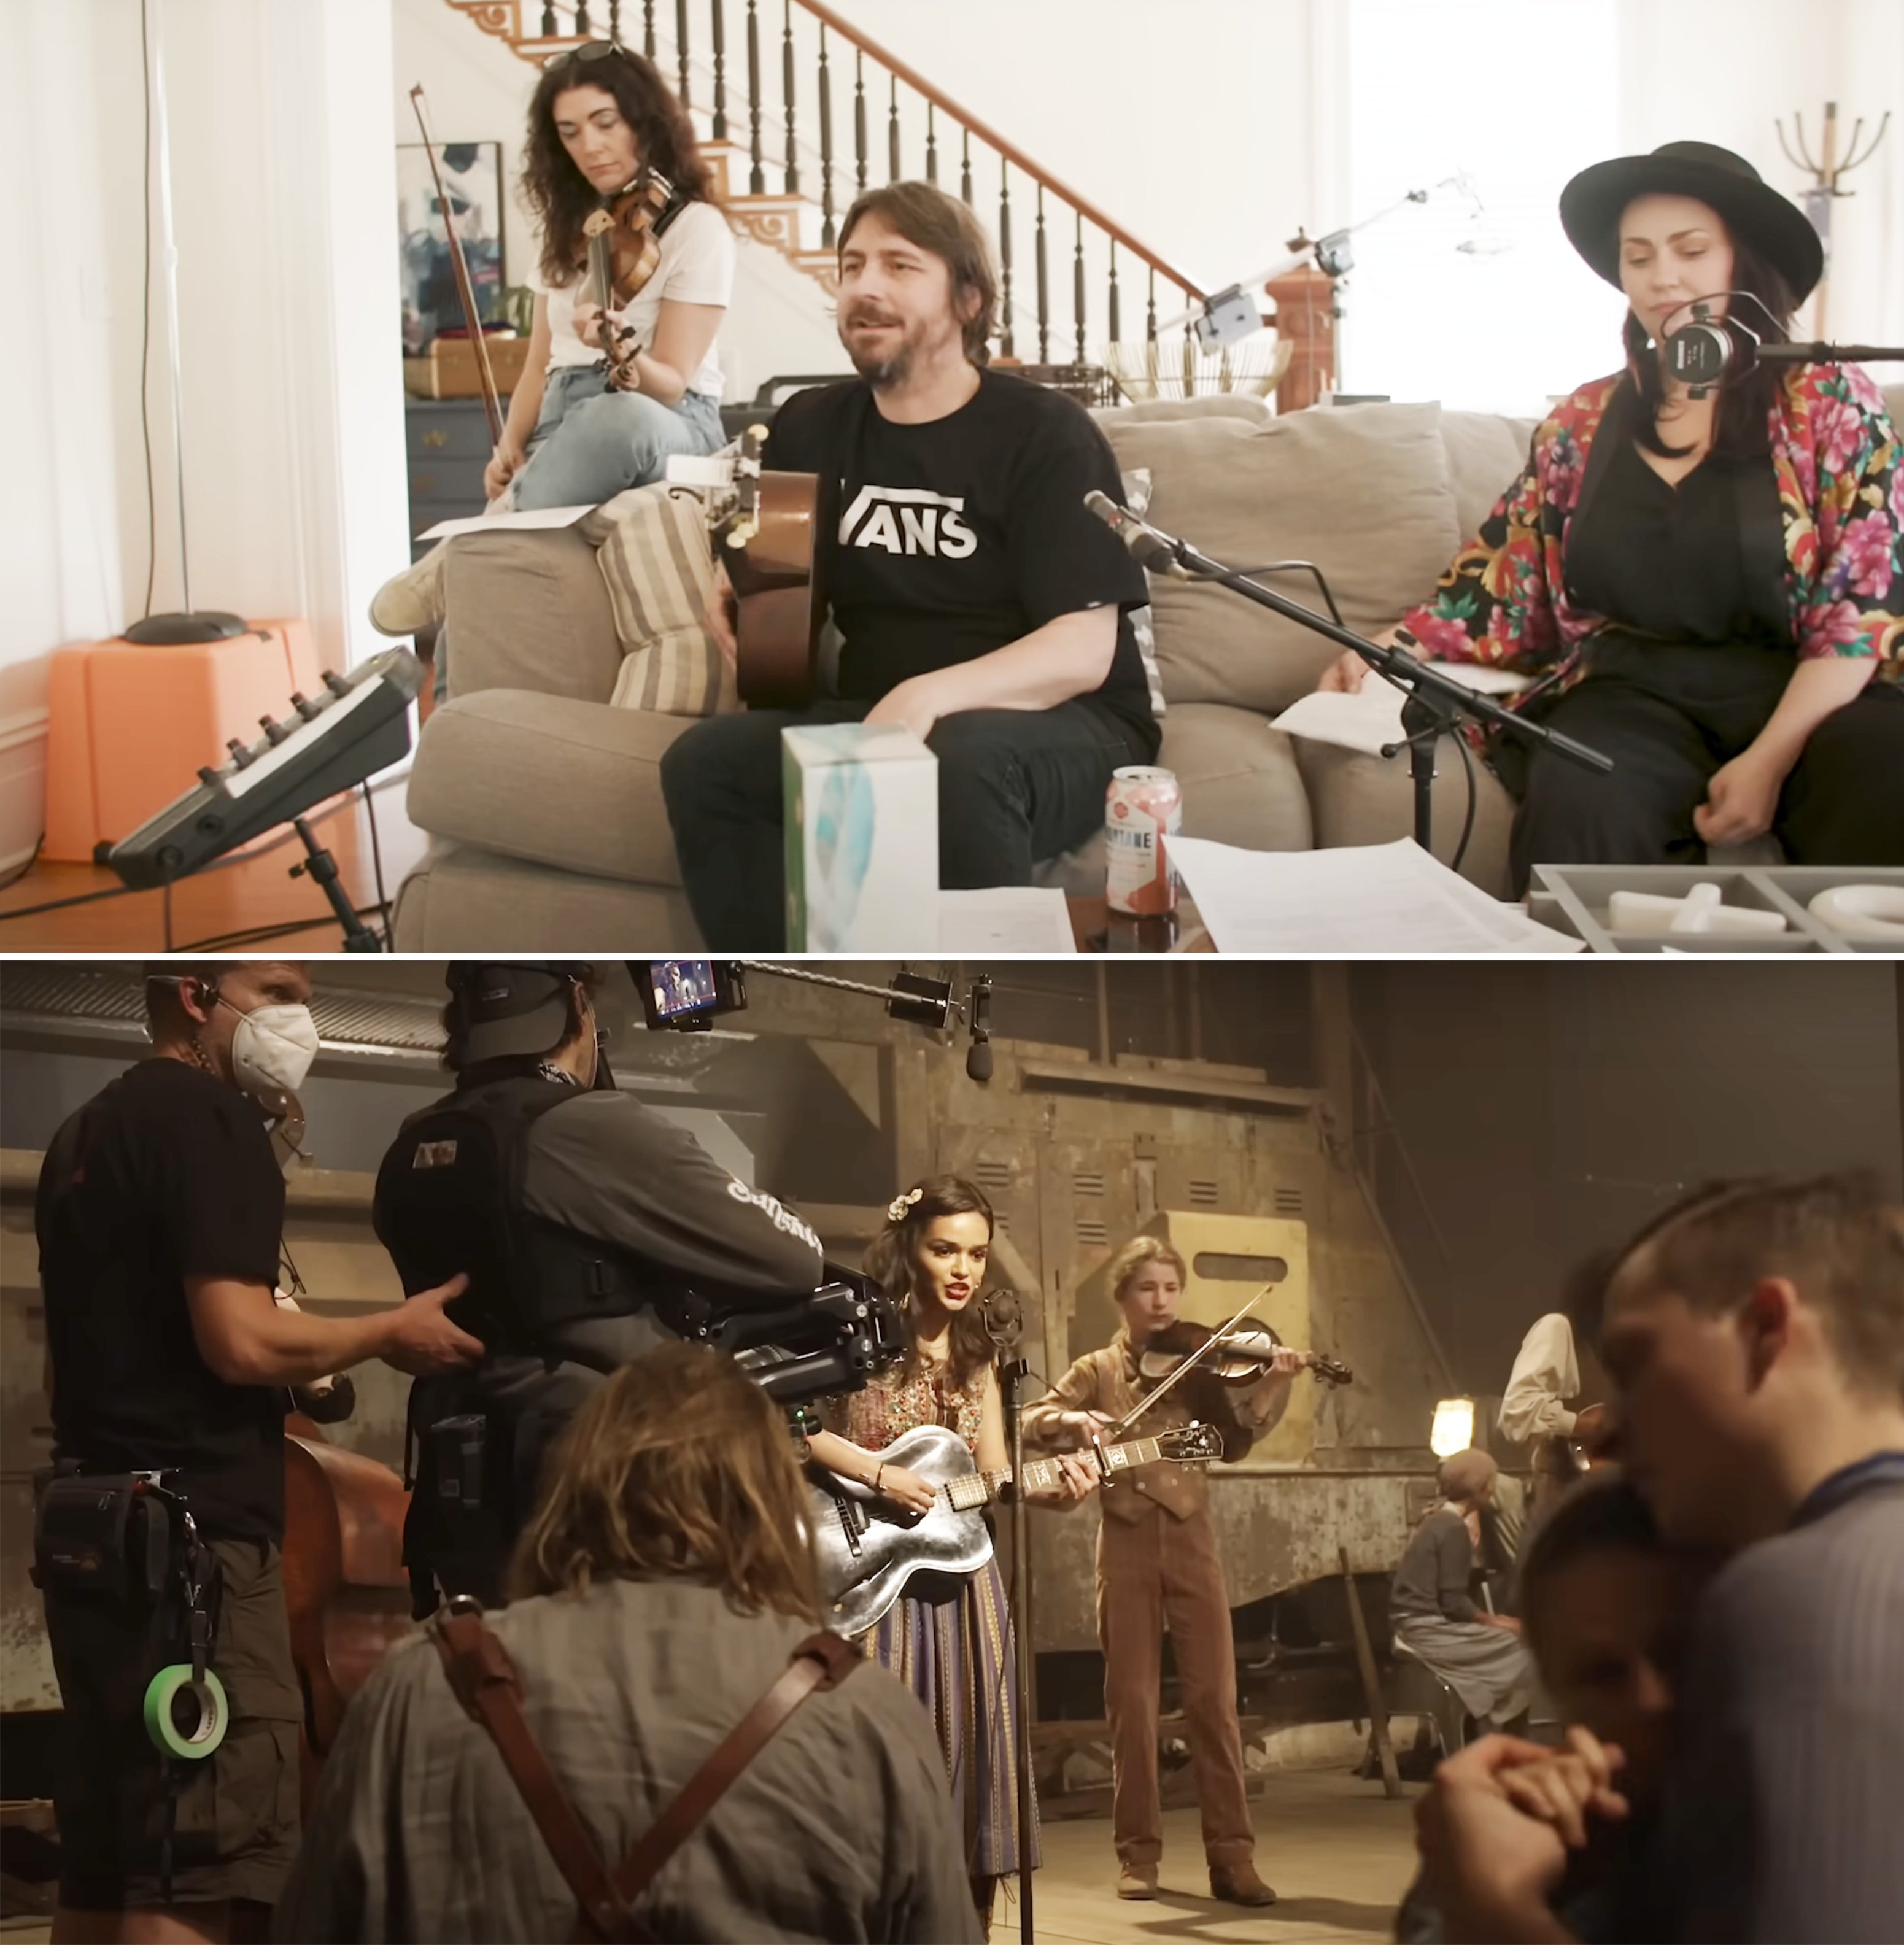 dave in the living room with other artists performing songs and behind the scenes filming of rachel playing on a stage